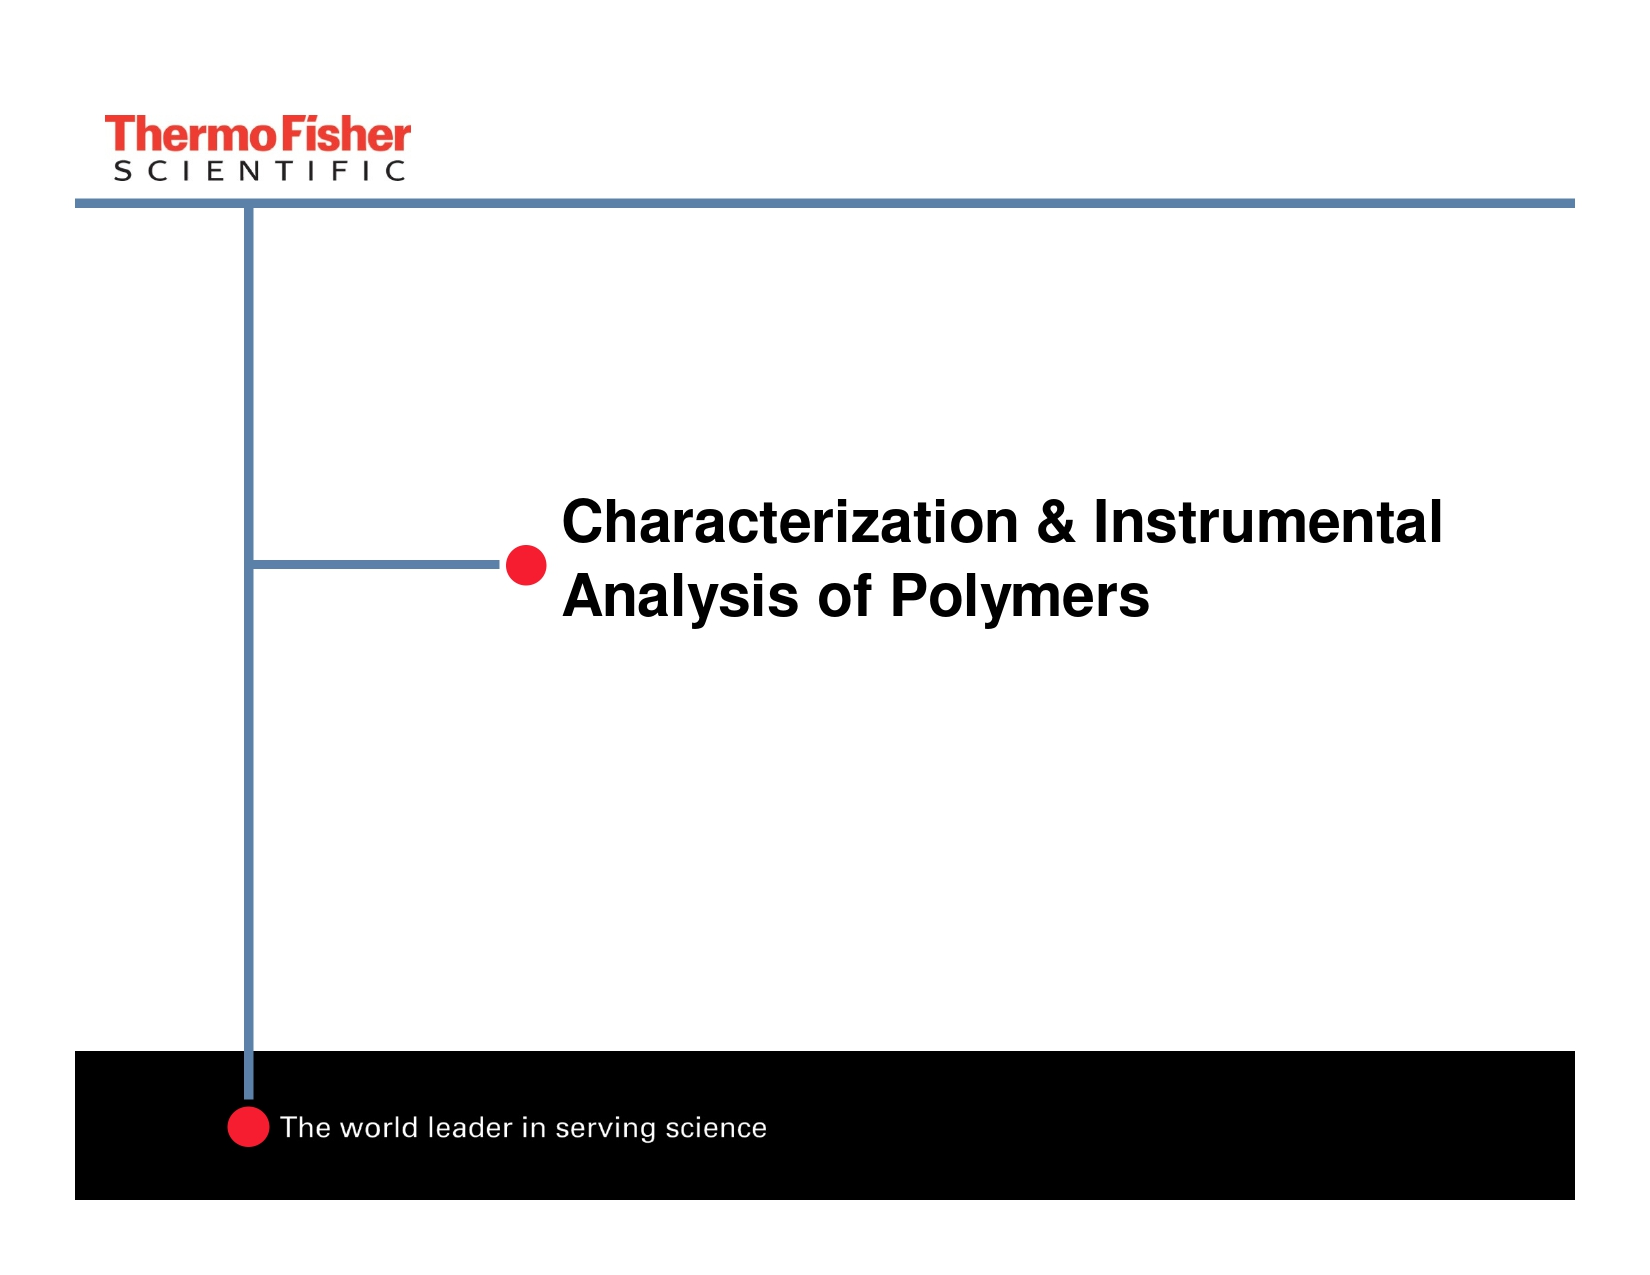 Characterization & Instrumental Analysis of Polymers